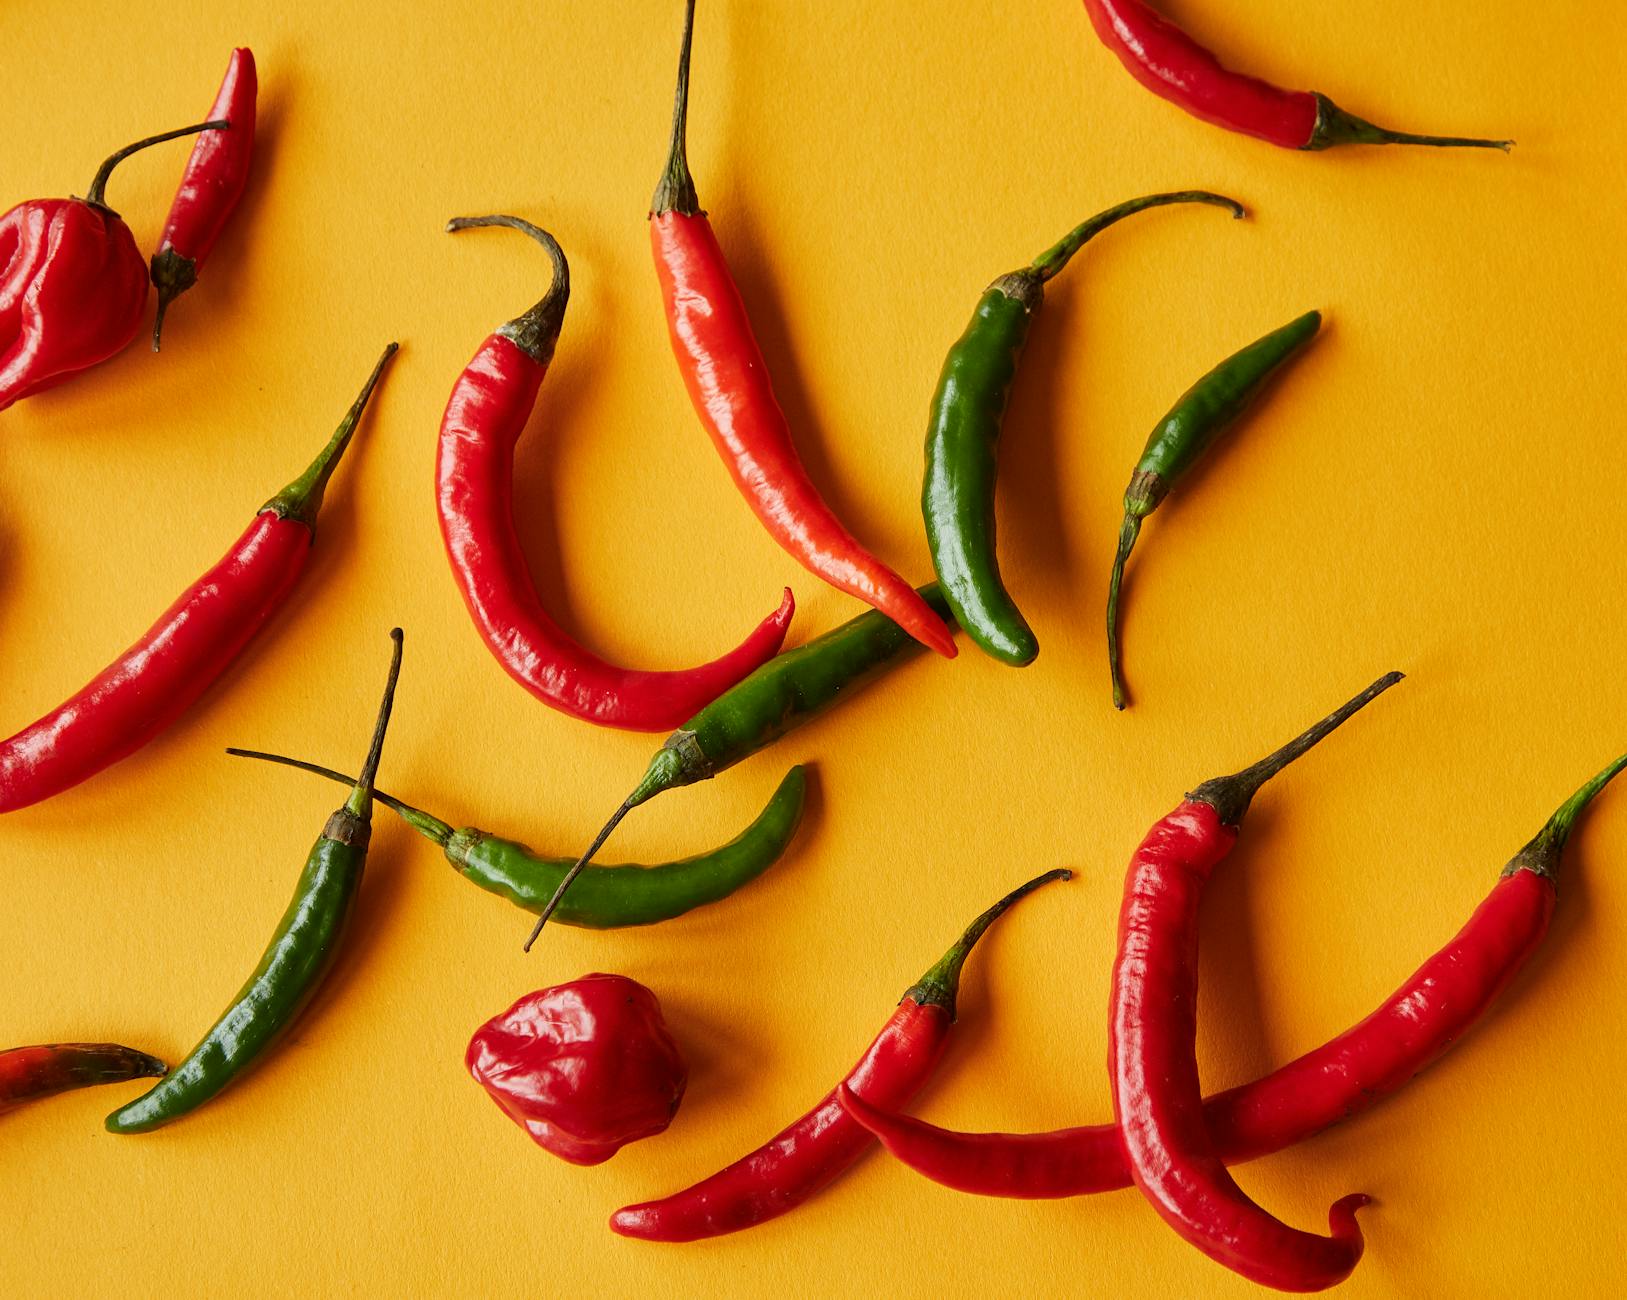 Red and green peppers on yellow background